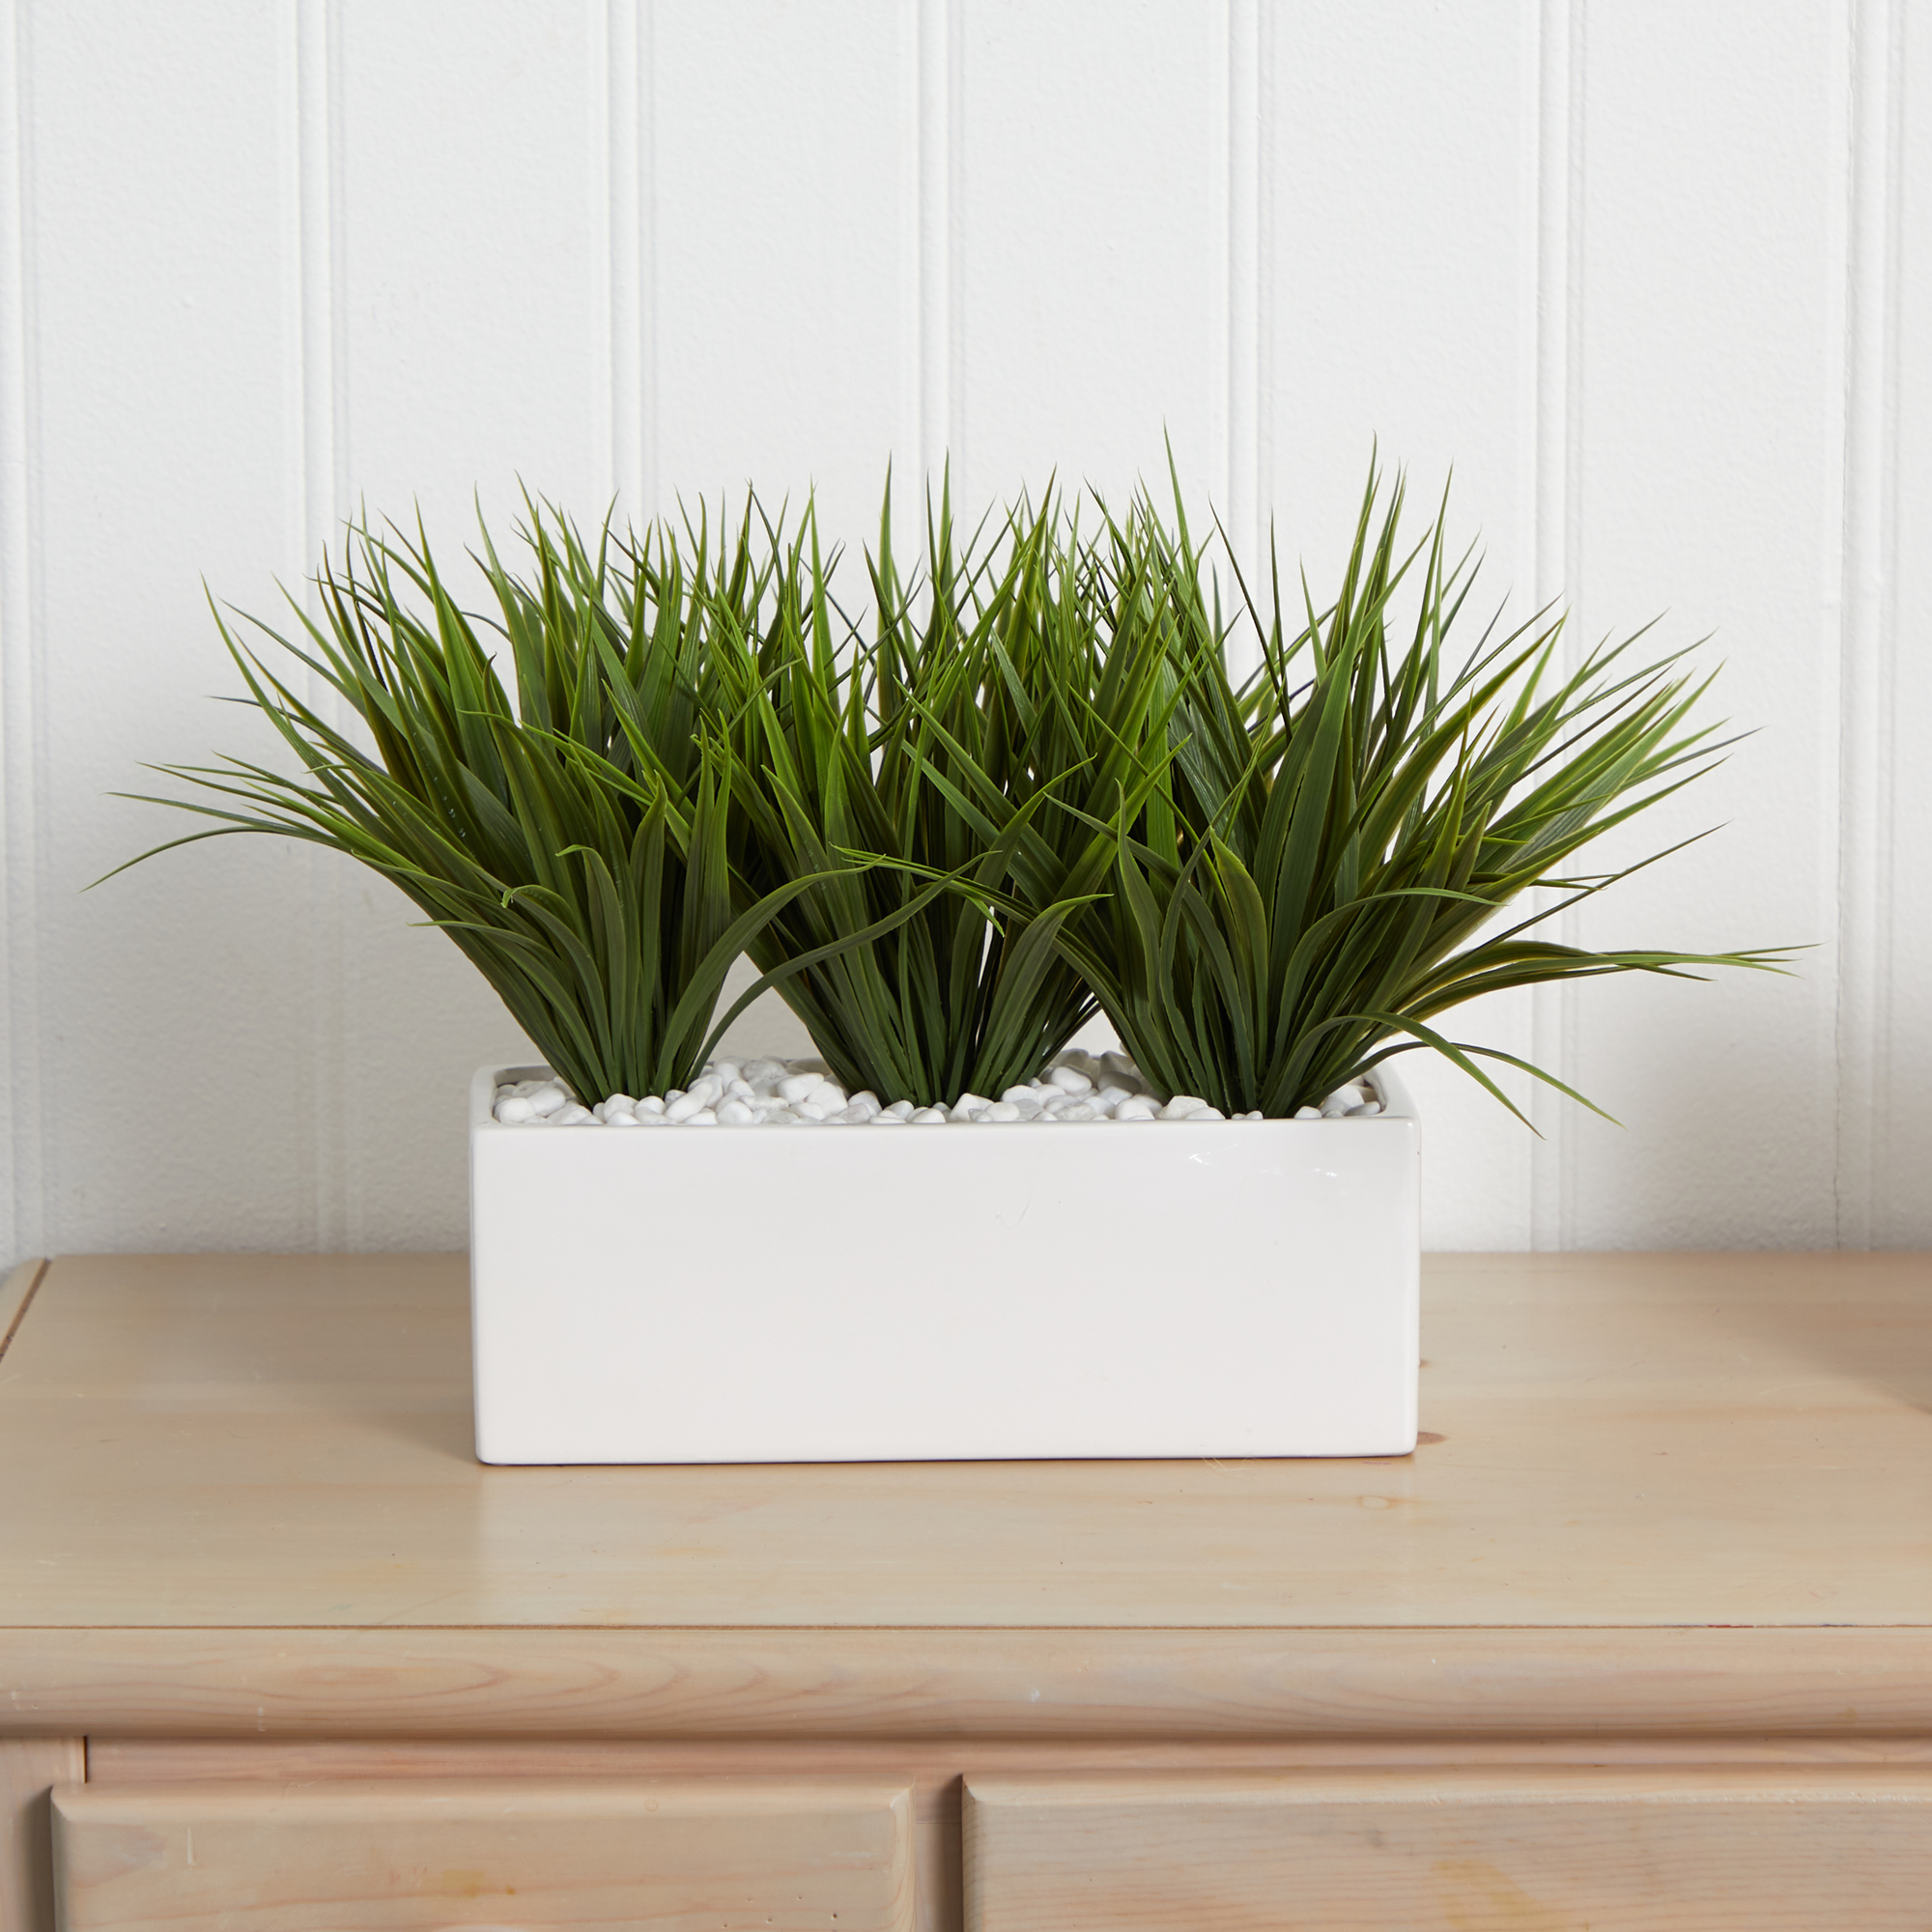 Nearly Natural Green 17"W x 8"D Vanilla Grass in a White Rectangular Planter - image 3 of 4